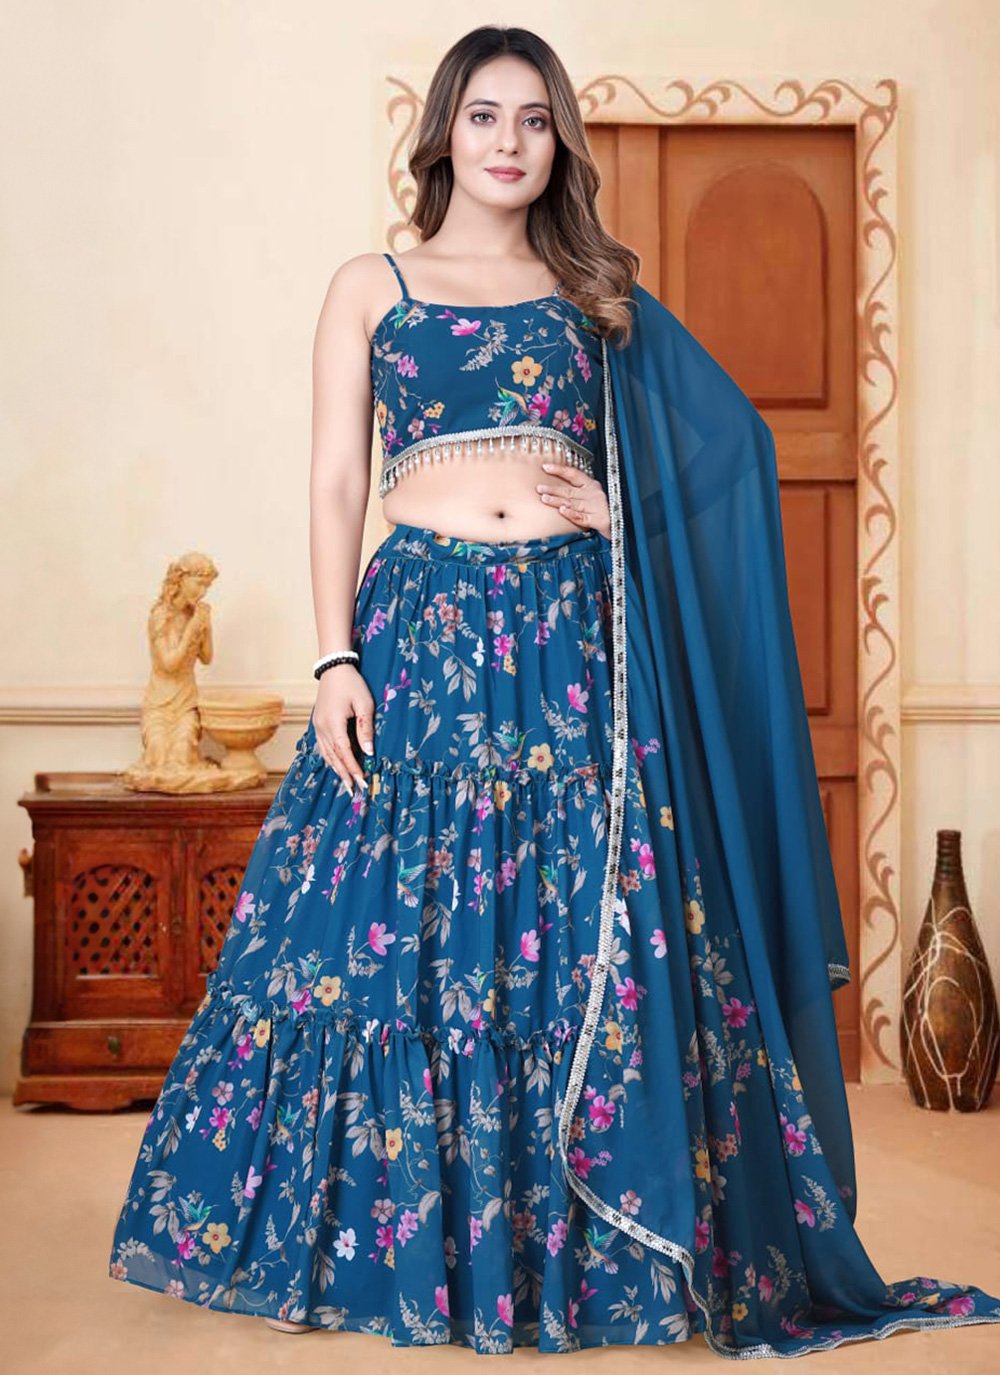 Ghagra Choli Designs With Price for the Brides to Look Stunning